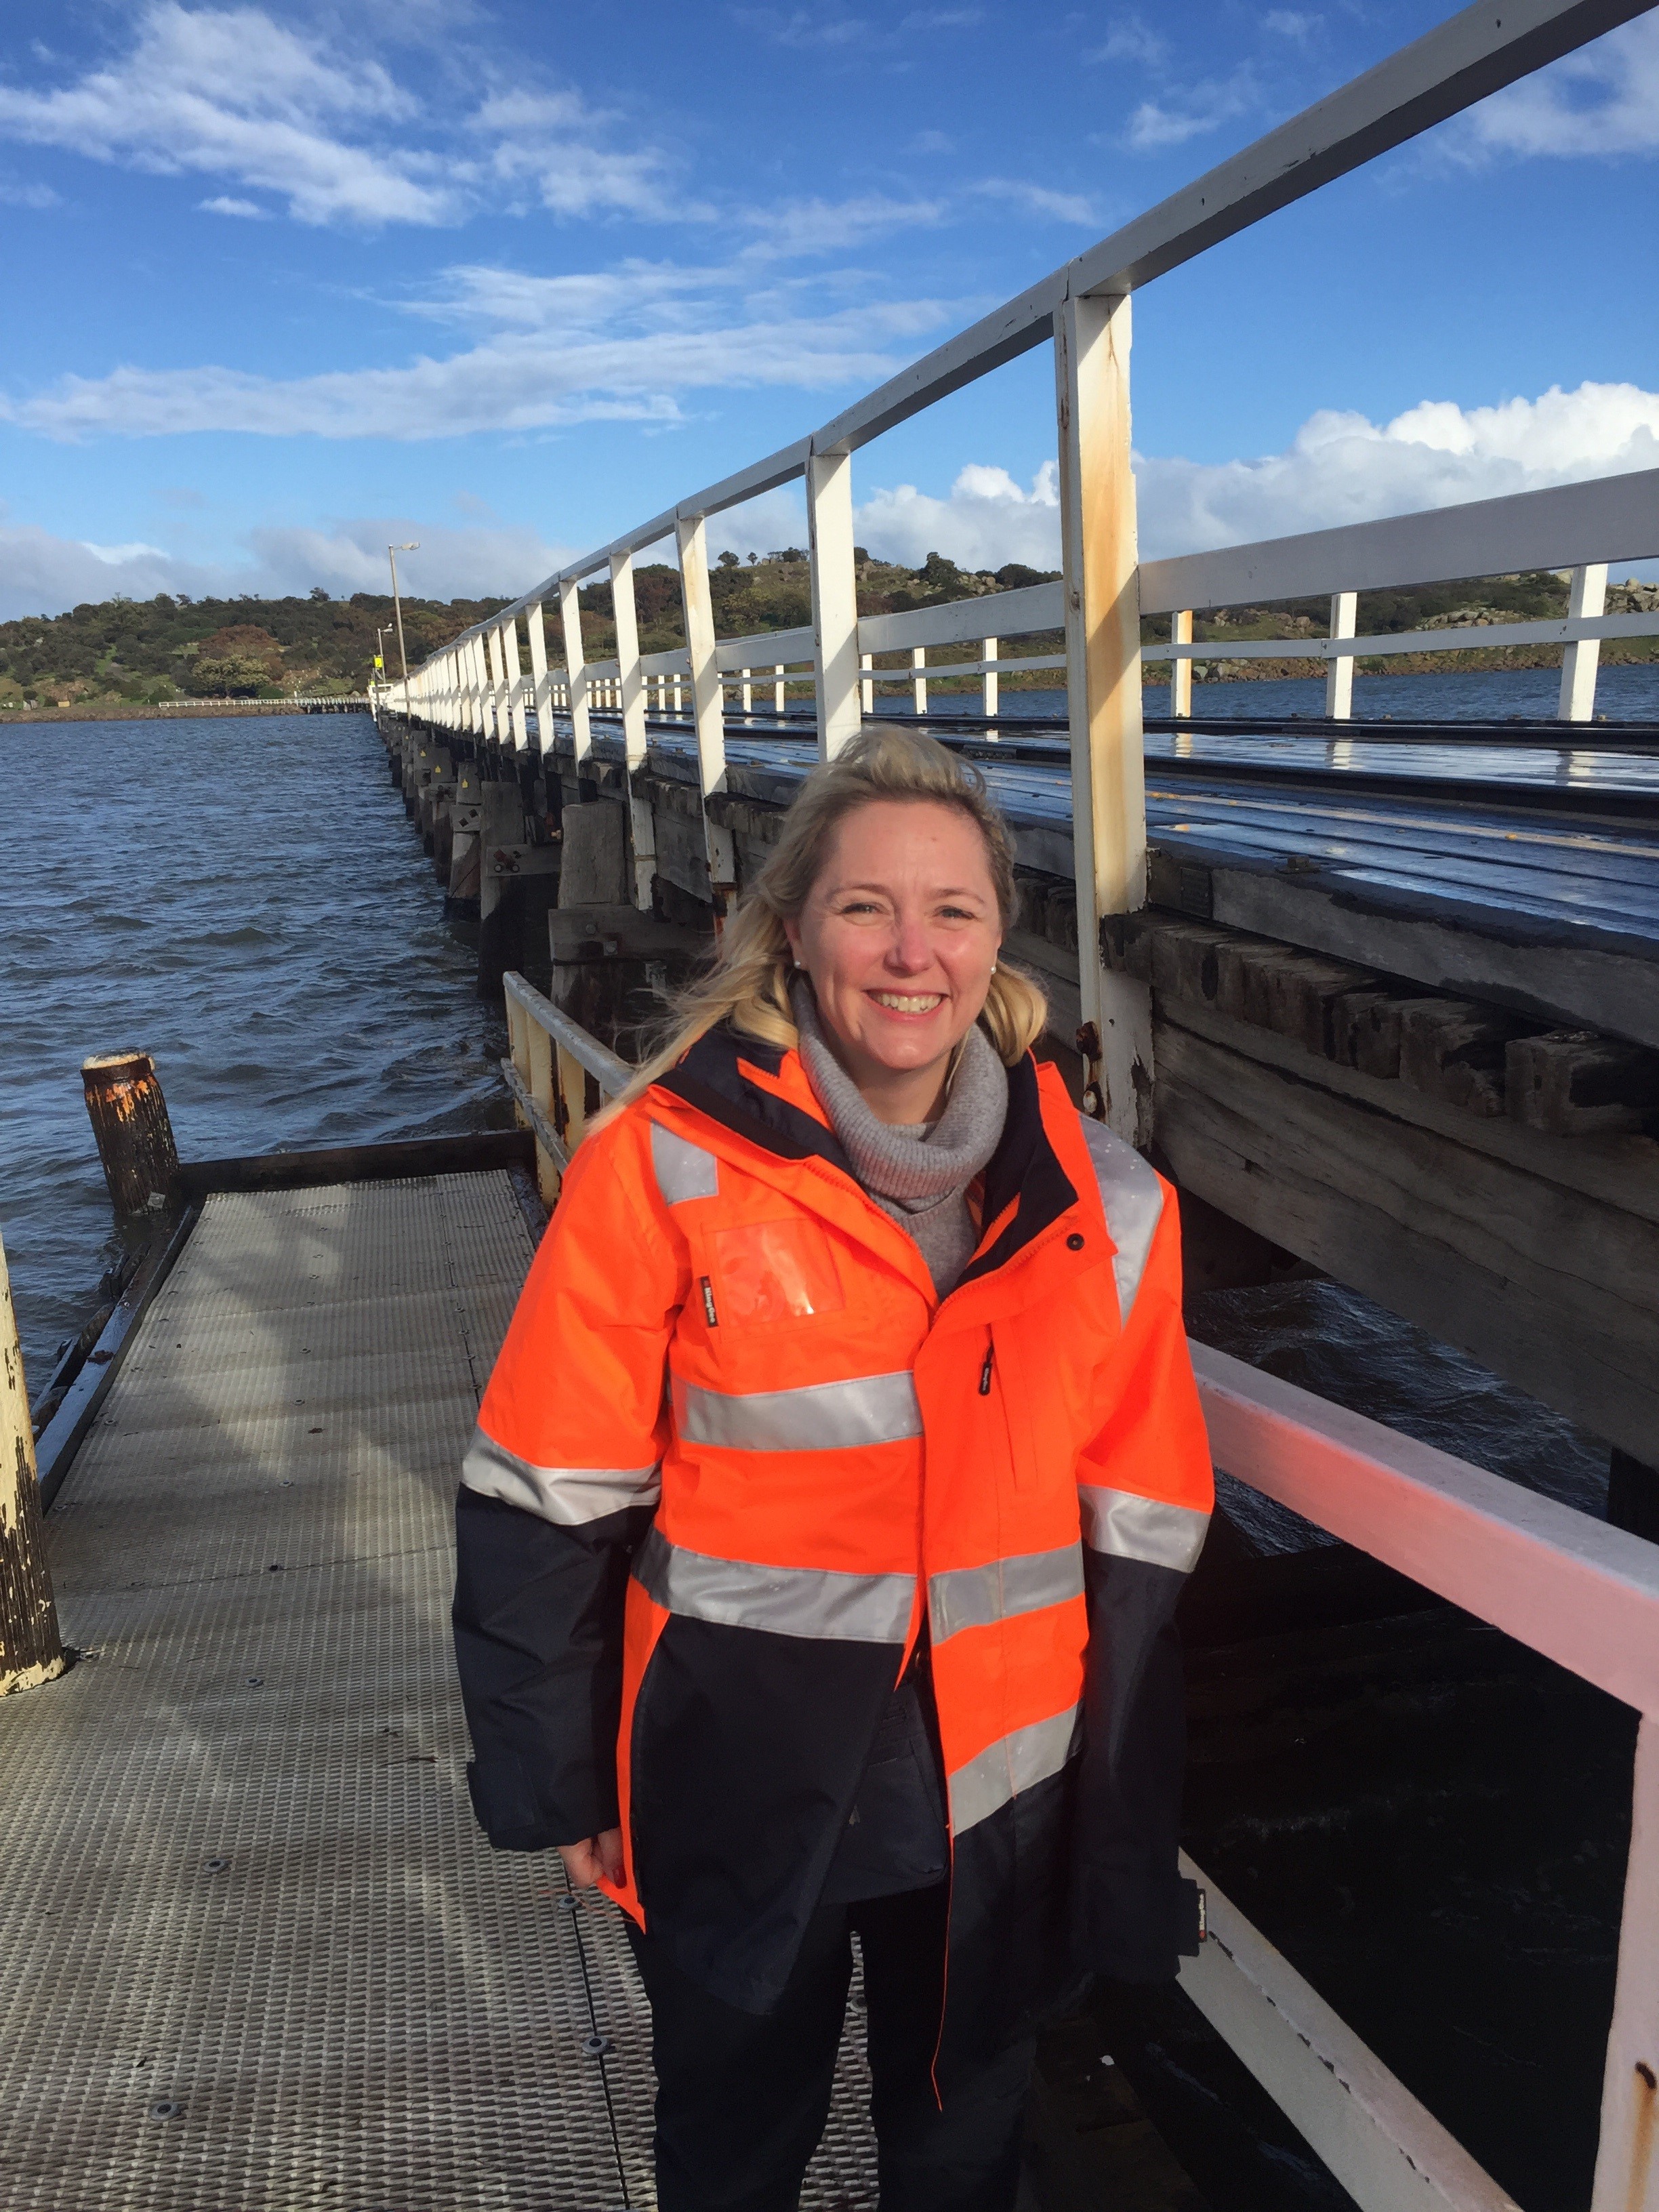 Emma Kokar is wearing an orange high vis jacket and is standing by the water on a jetty. Emma has mid length blonde hair and is smiling